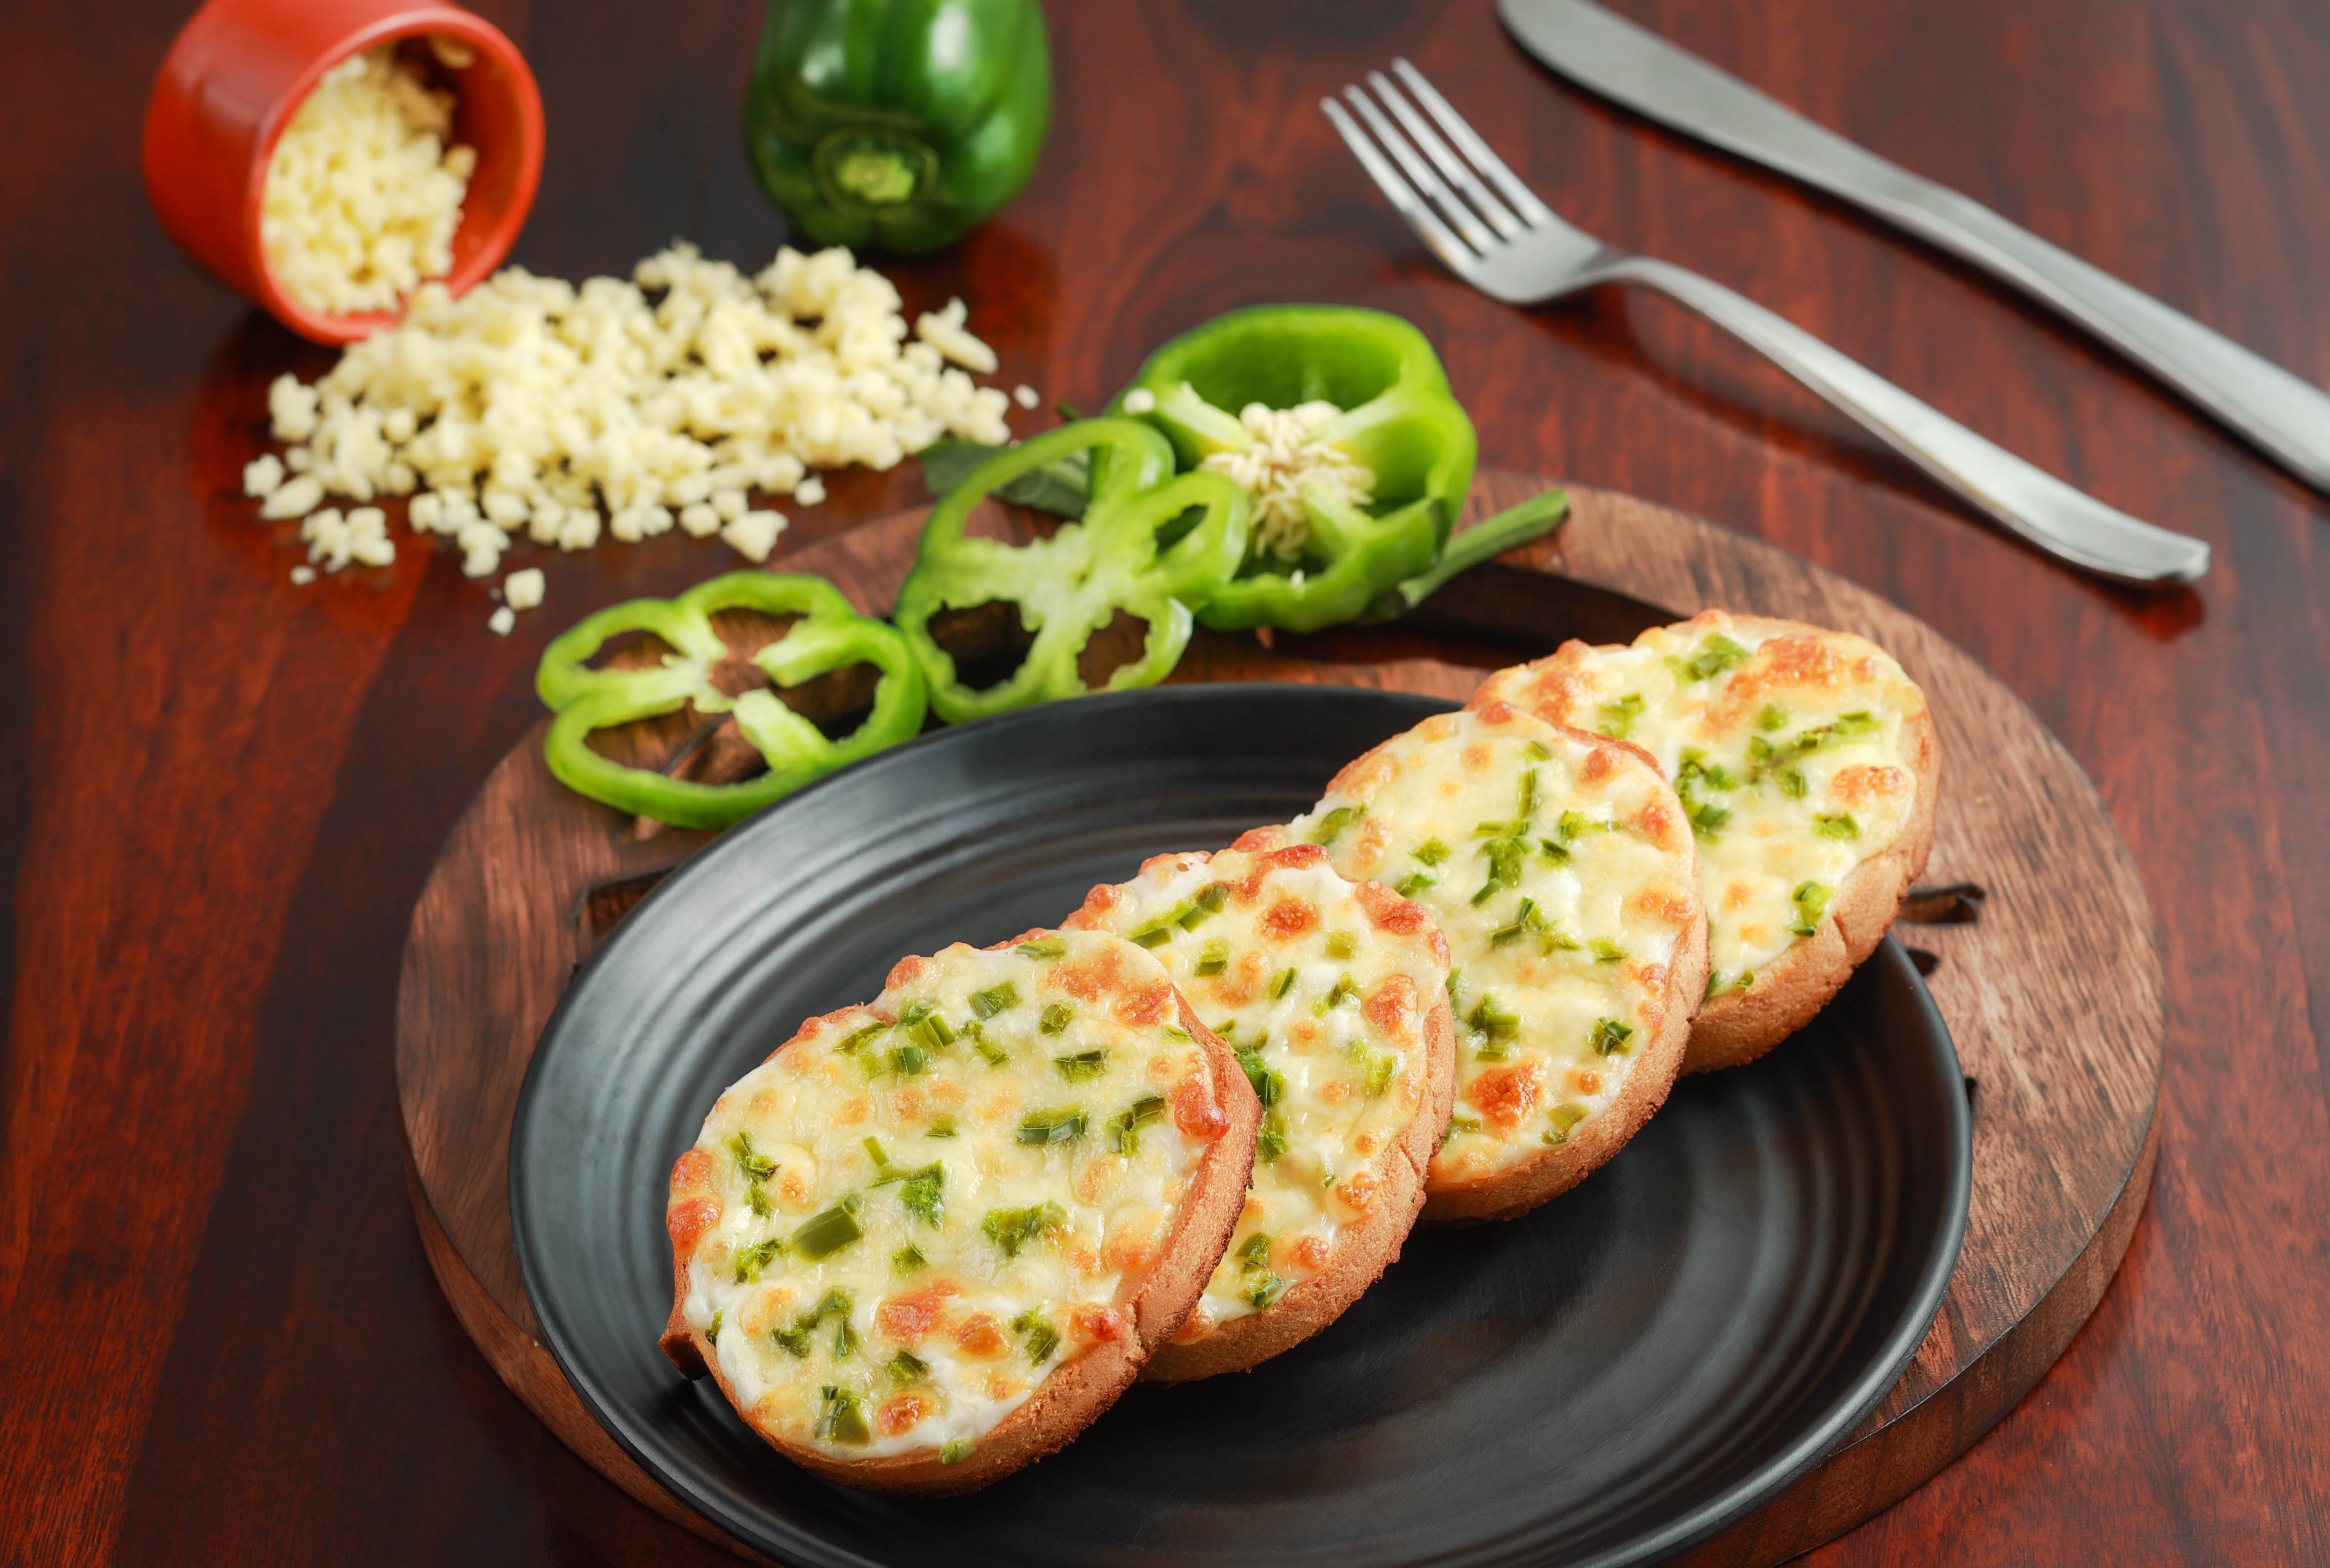 Best Cheese And Chilli Garlic Bread in Ghaziabad